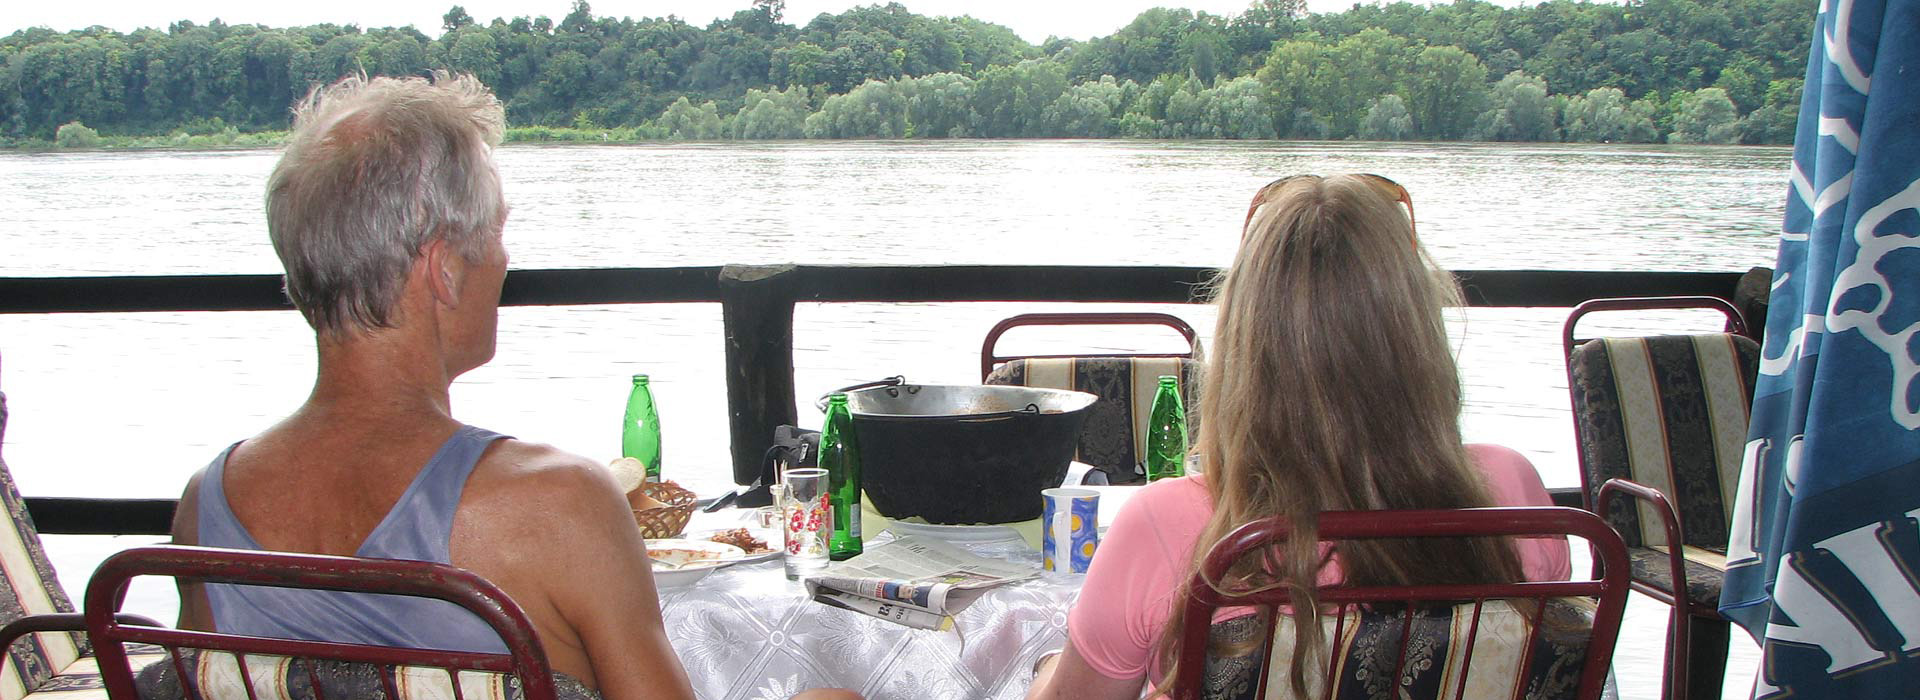 Danube Self-Guided Cycling Holiday - Restaurants by the river